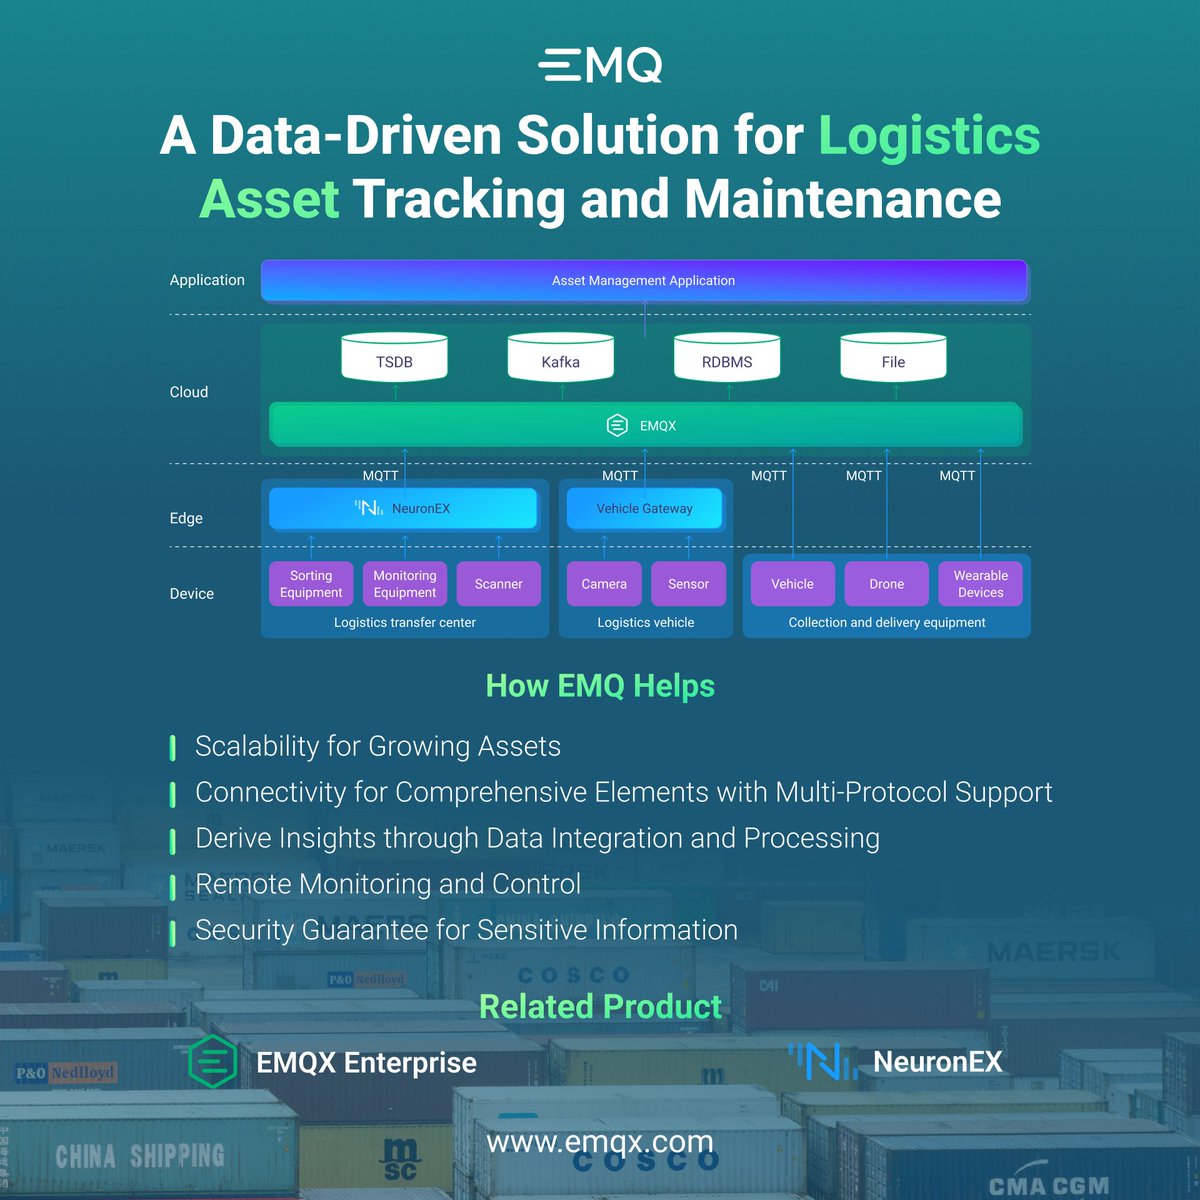 🚚 Optimize and track your logistics assets with #EMQ's comprehensive data-driven solutions! From real-time monitoring to predictive maintenance, we ensure efficiency and reduced downtime. 🕙 🛠️ 📊 #SmartLogistics #PredictiveMaintenance #IoT #MQTT 🧐 🔗 social.emqx.com/u/4Vozai